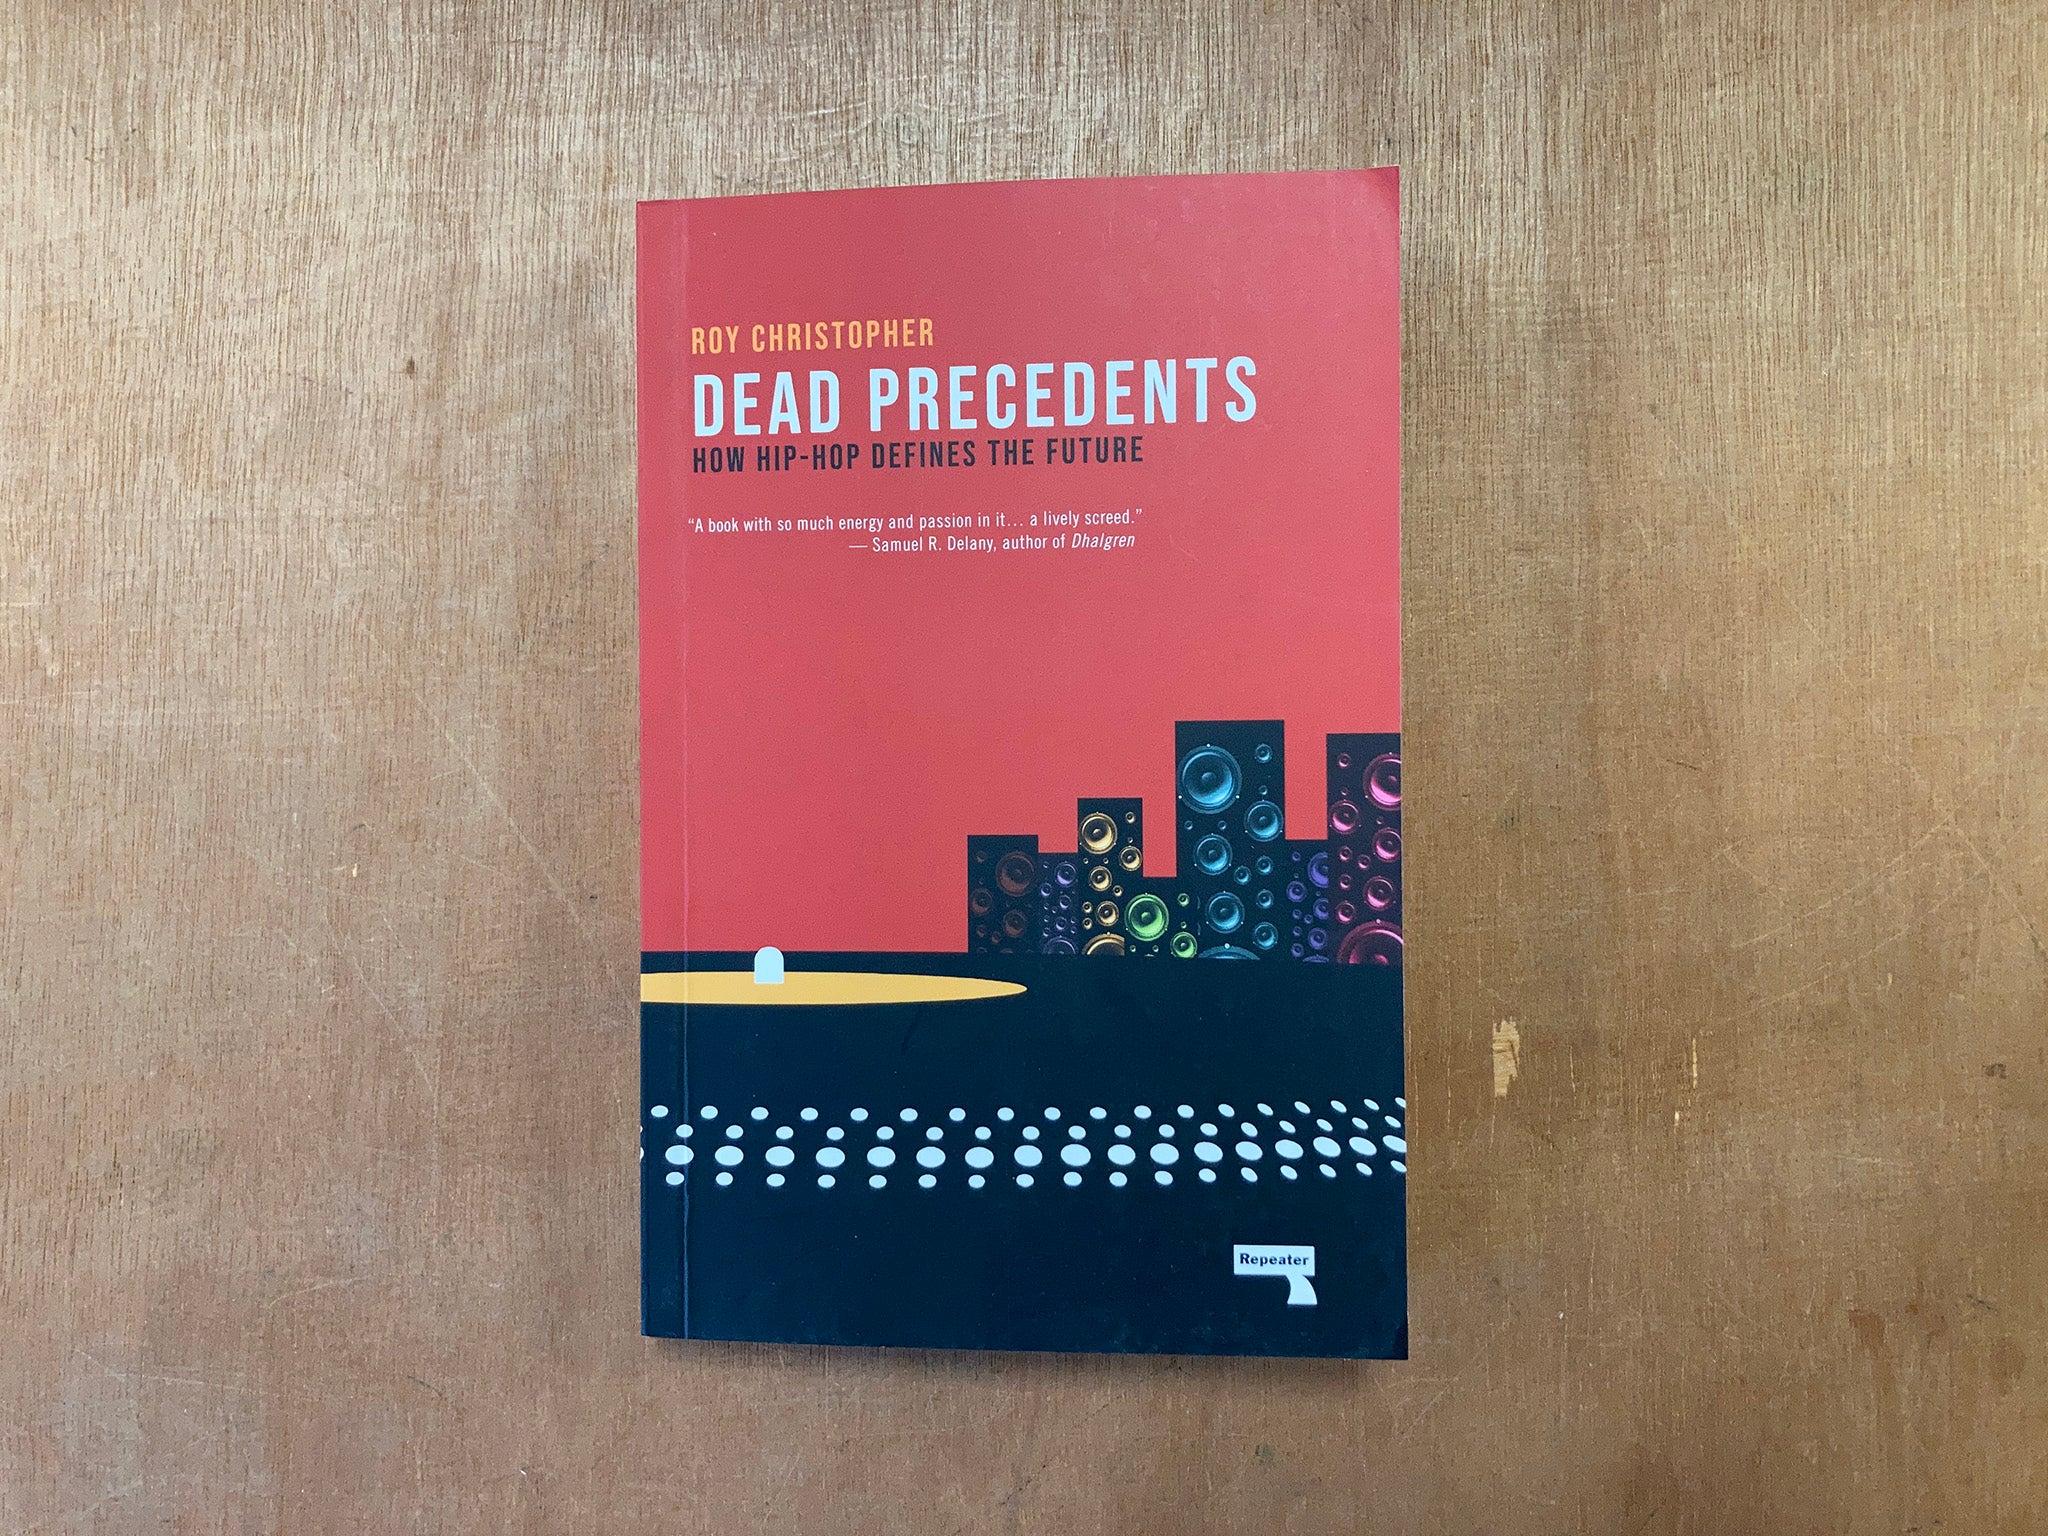 DEAD PRECEDENTS: HOW HIP-HOP DEFINES THE FUTURE by Roy Christopher